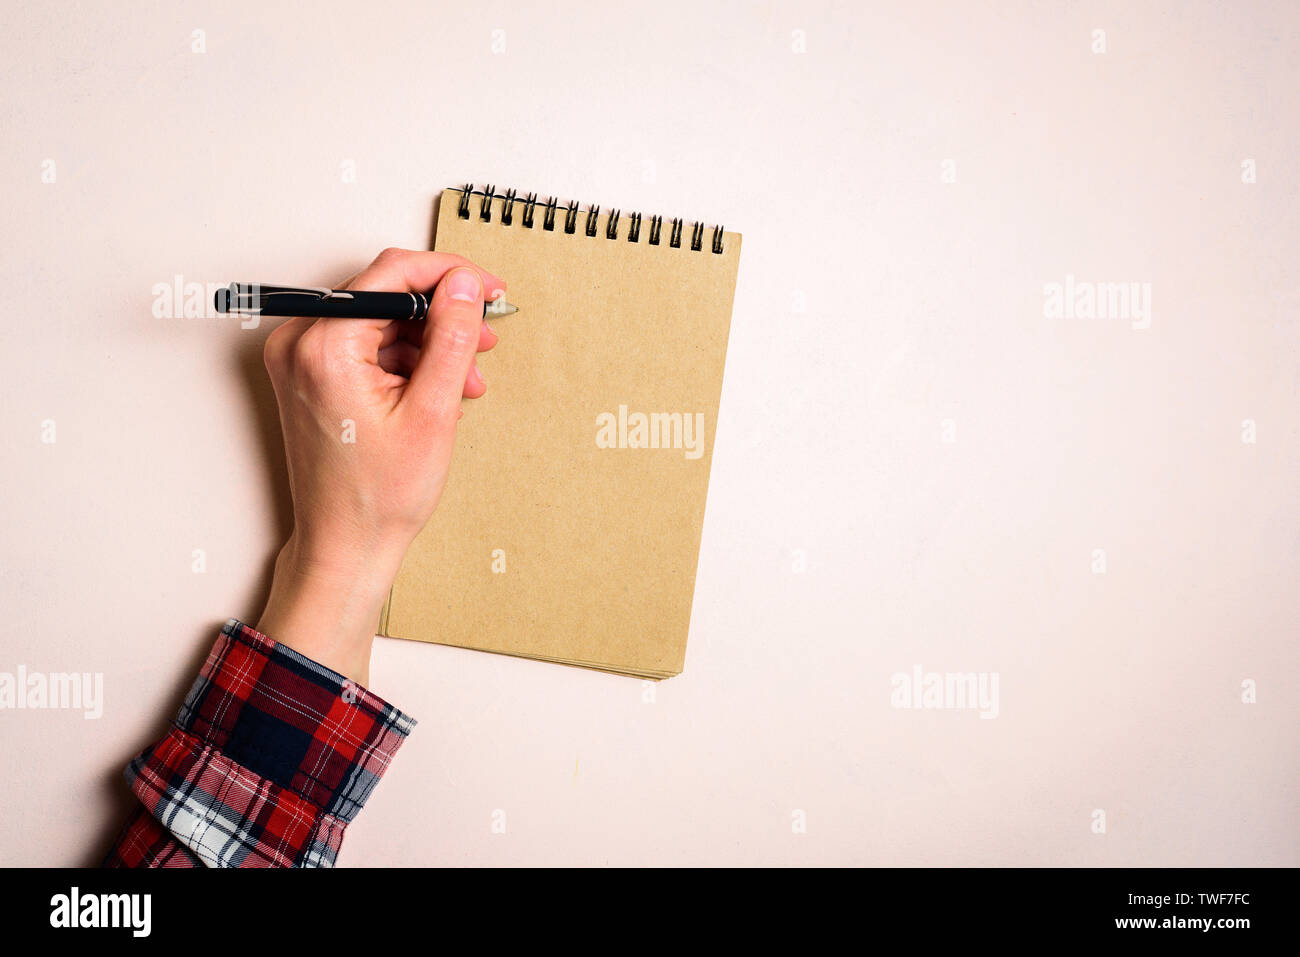 https://c8.alamy.com/comp/TWF7FC/man-writing-by-left-hand-left-hander-day-concept-working-place-of-lefty-TWF7FC.jpg